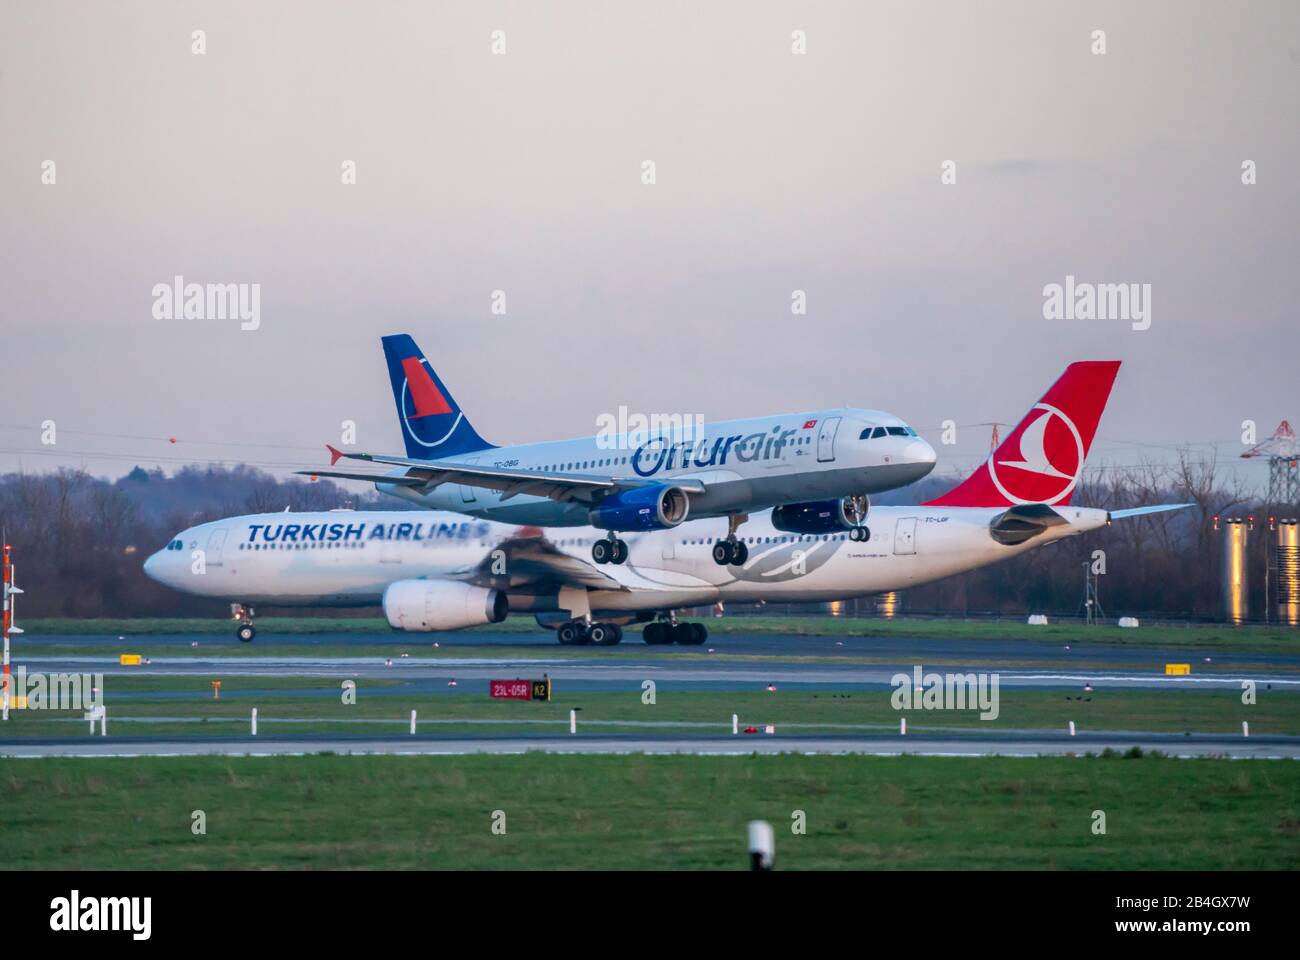 DŸsseldorf International Airport, DUS, aircraft on landing, Onur Air, Airbus A320-233, Turkish Airlines, Airbus A330-300, Stock Photo